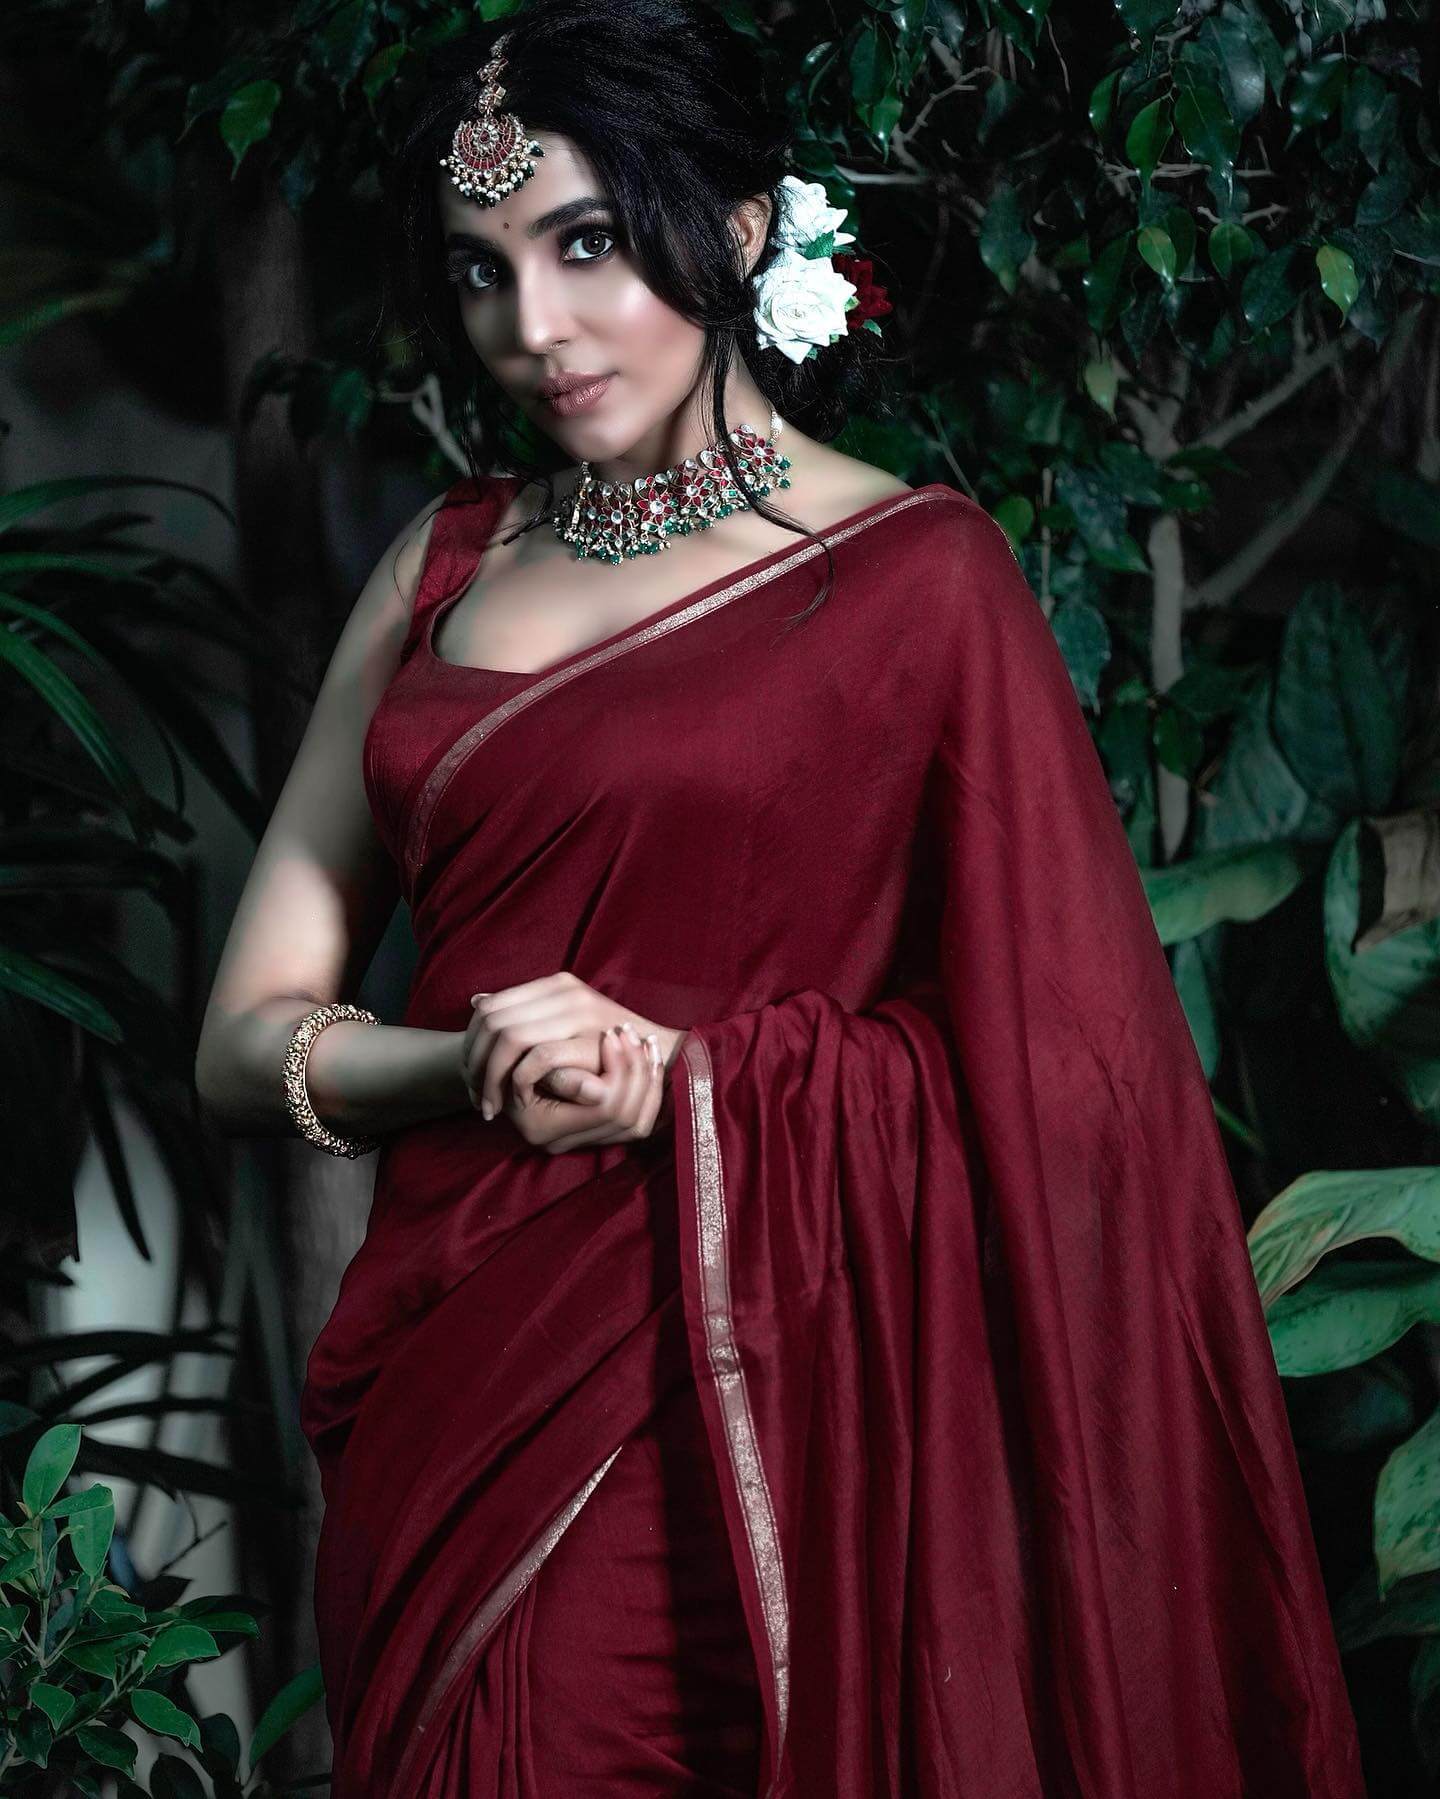 Parvathy Nair Mesmerizing Look In Red Saree With Sleeveless Blouse